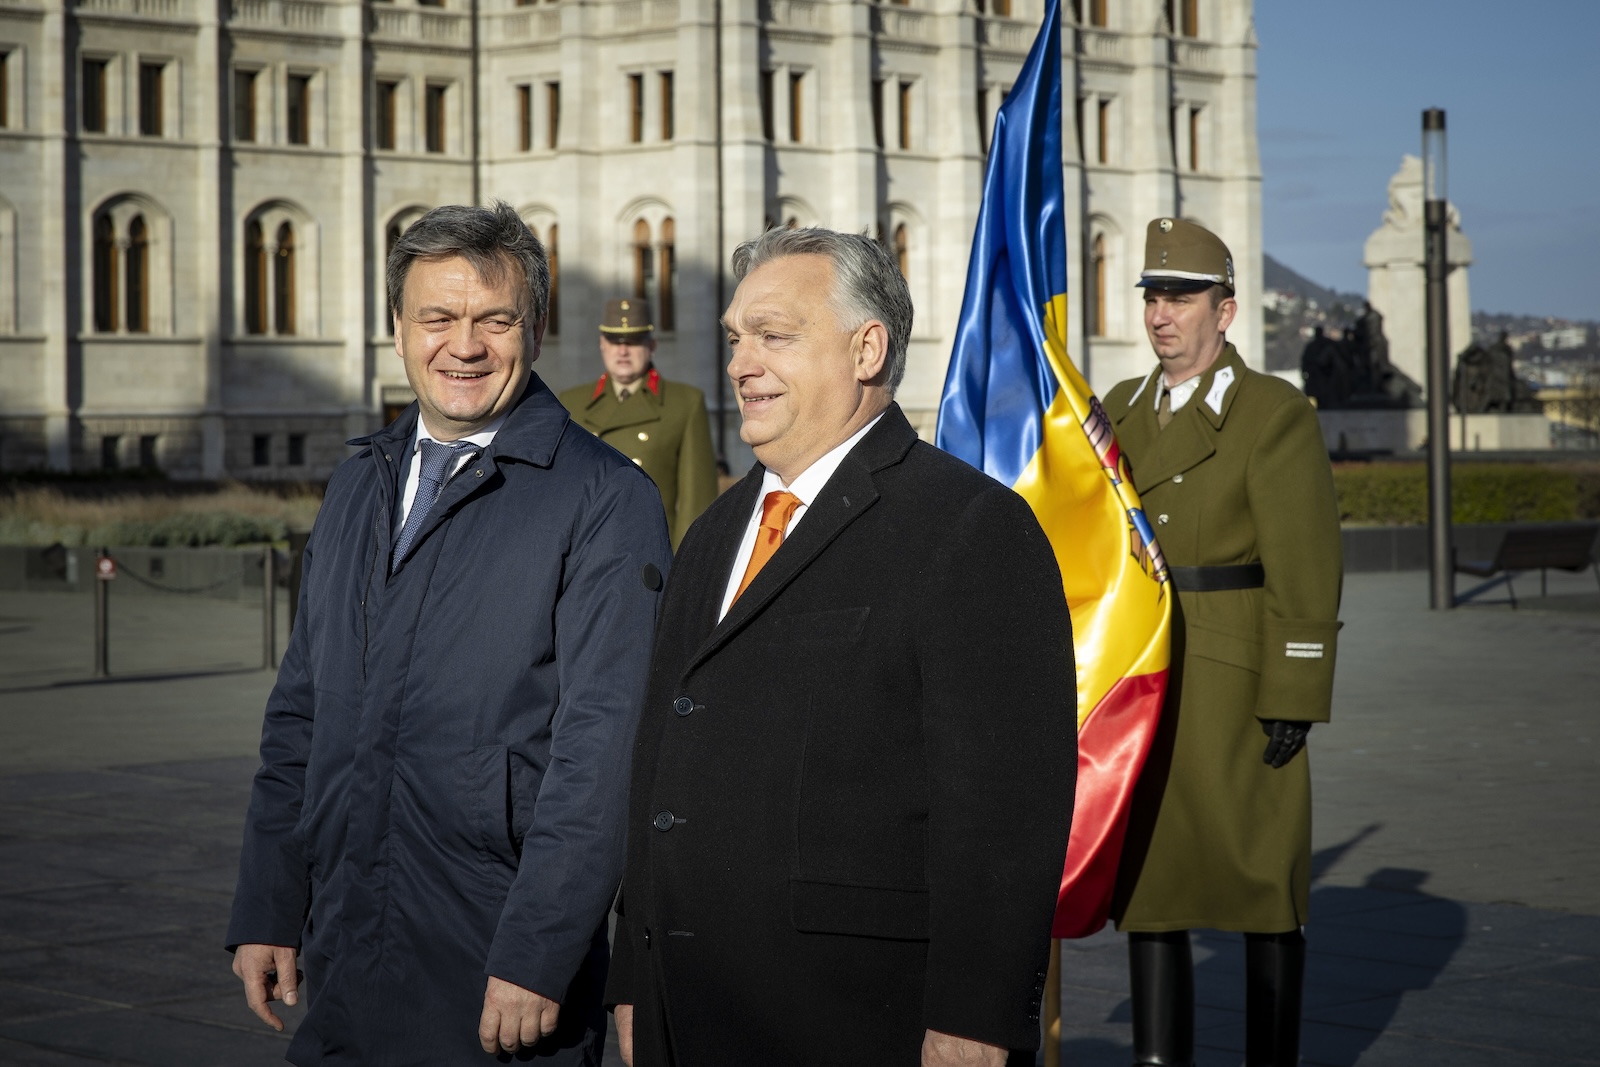 epa11103338 A handout photo made available by the Hungarian Prime Minister's press office shows Hungarian Prime Minister Viktor Orban (R) receiving Prime Minister of Moldova Dorin Recean with military honors at the Parliament building in Budapest, Hungary, 25 January 2024.  EPA/ZOLTAN FISCHER/HUNGARIAN PRIME MINISTERâ€™S PRESS OFFICE/HANDOUT HUNGARY OUT HANDOUT EDITORIAL USE ONLY/NO SALES HANDOUT EDITORIAL USE ONLY/NO SALES